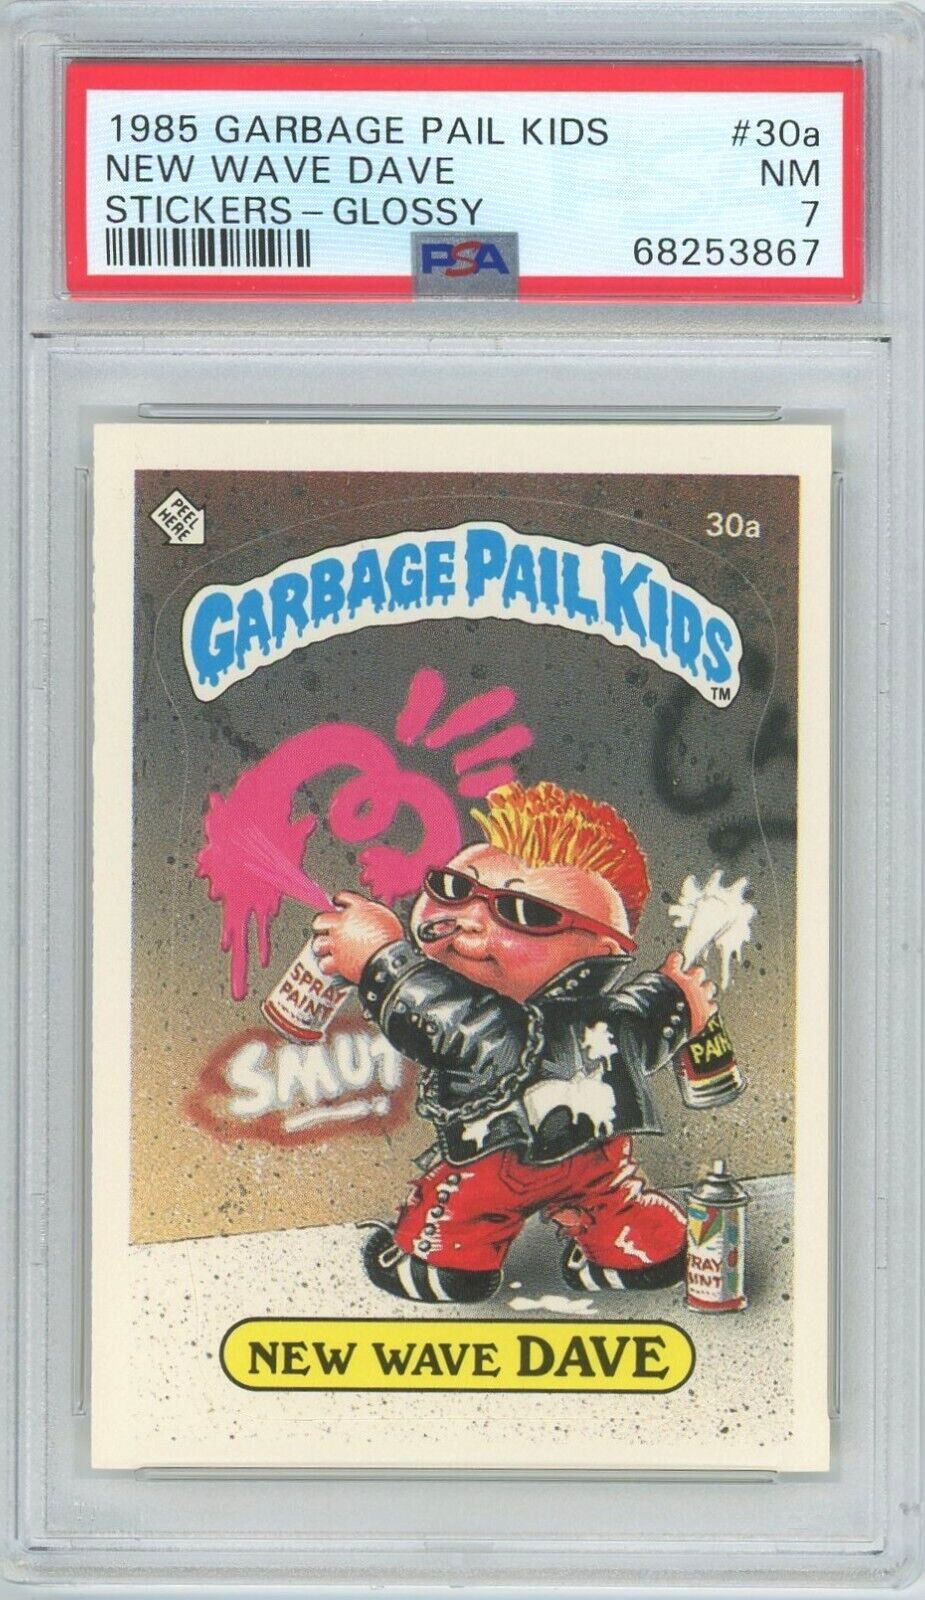 1985 Topps OS1 Garbage Pail Kids Series 1 NEW WAVE DAVE 30a GLOSSY Card PSA 7 NM